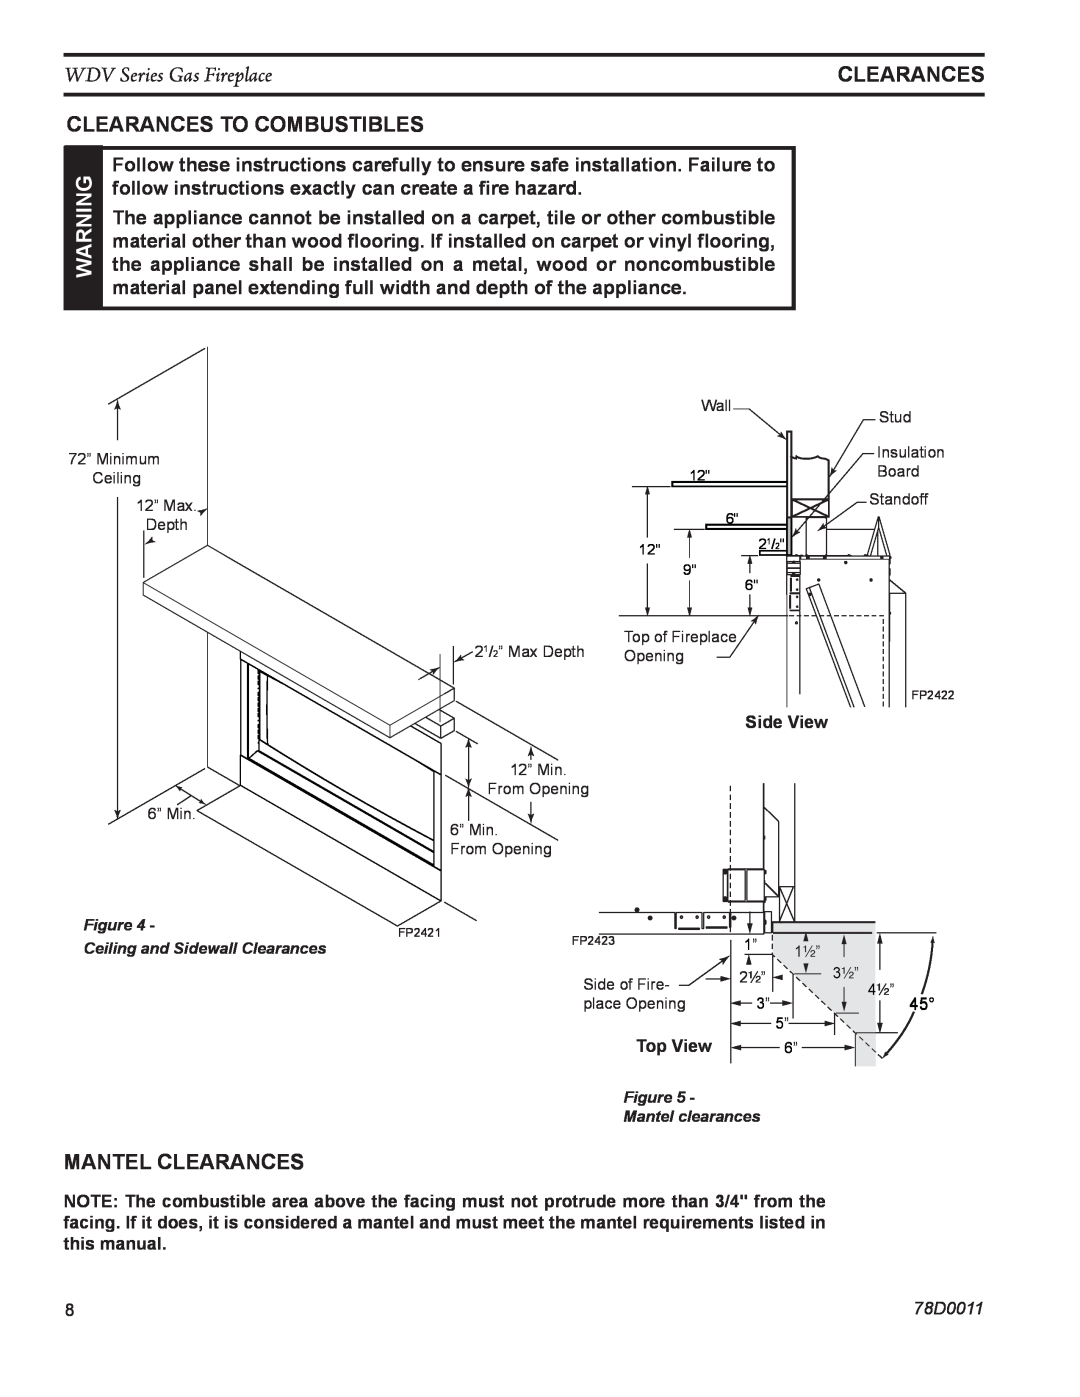 Monessen Hearth WDV500 manual Clearances to combustibles, mantel clearances, WDV Series Gas Fireplace 